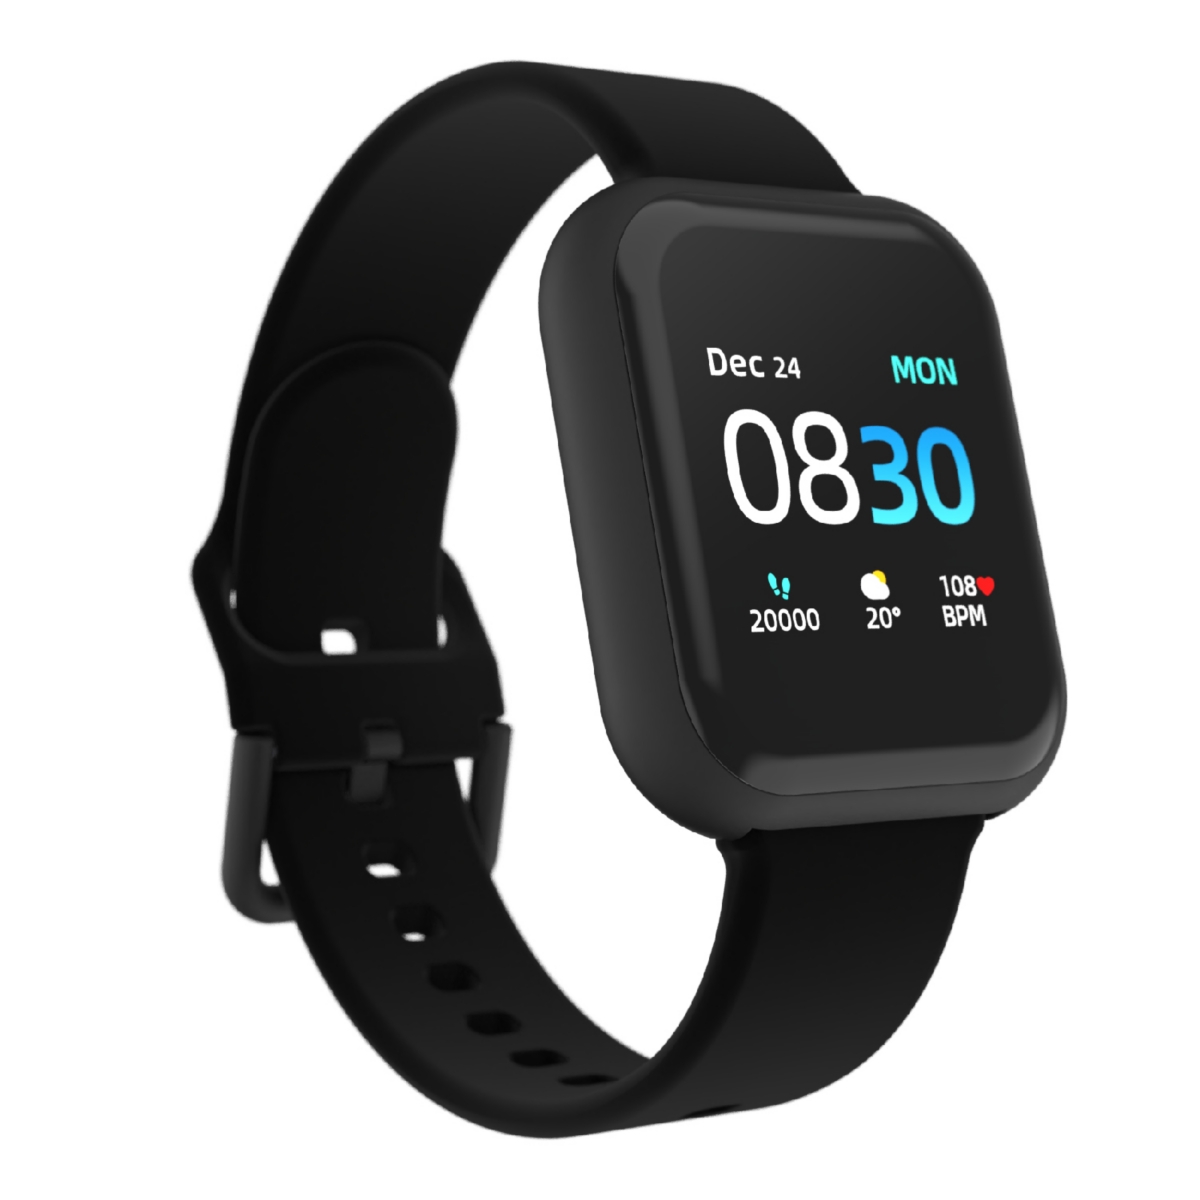 iTouch Air 3 Unisex Heart Rate Black Strap Smart Watch 44mm